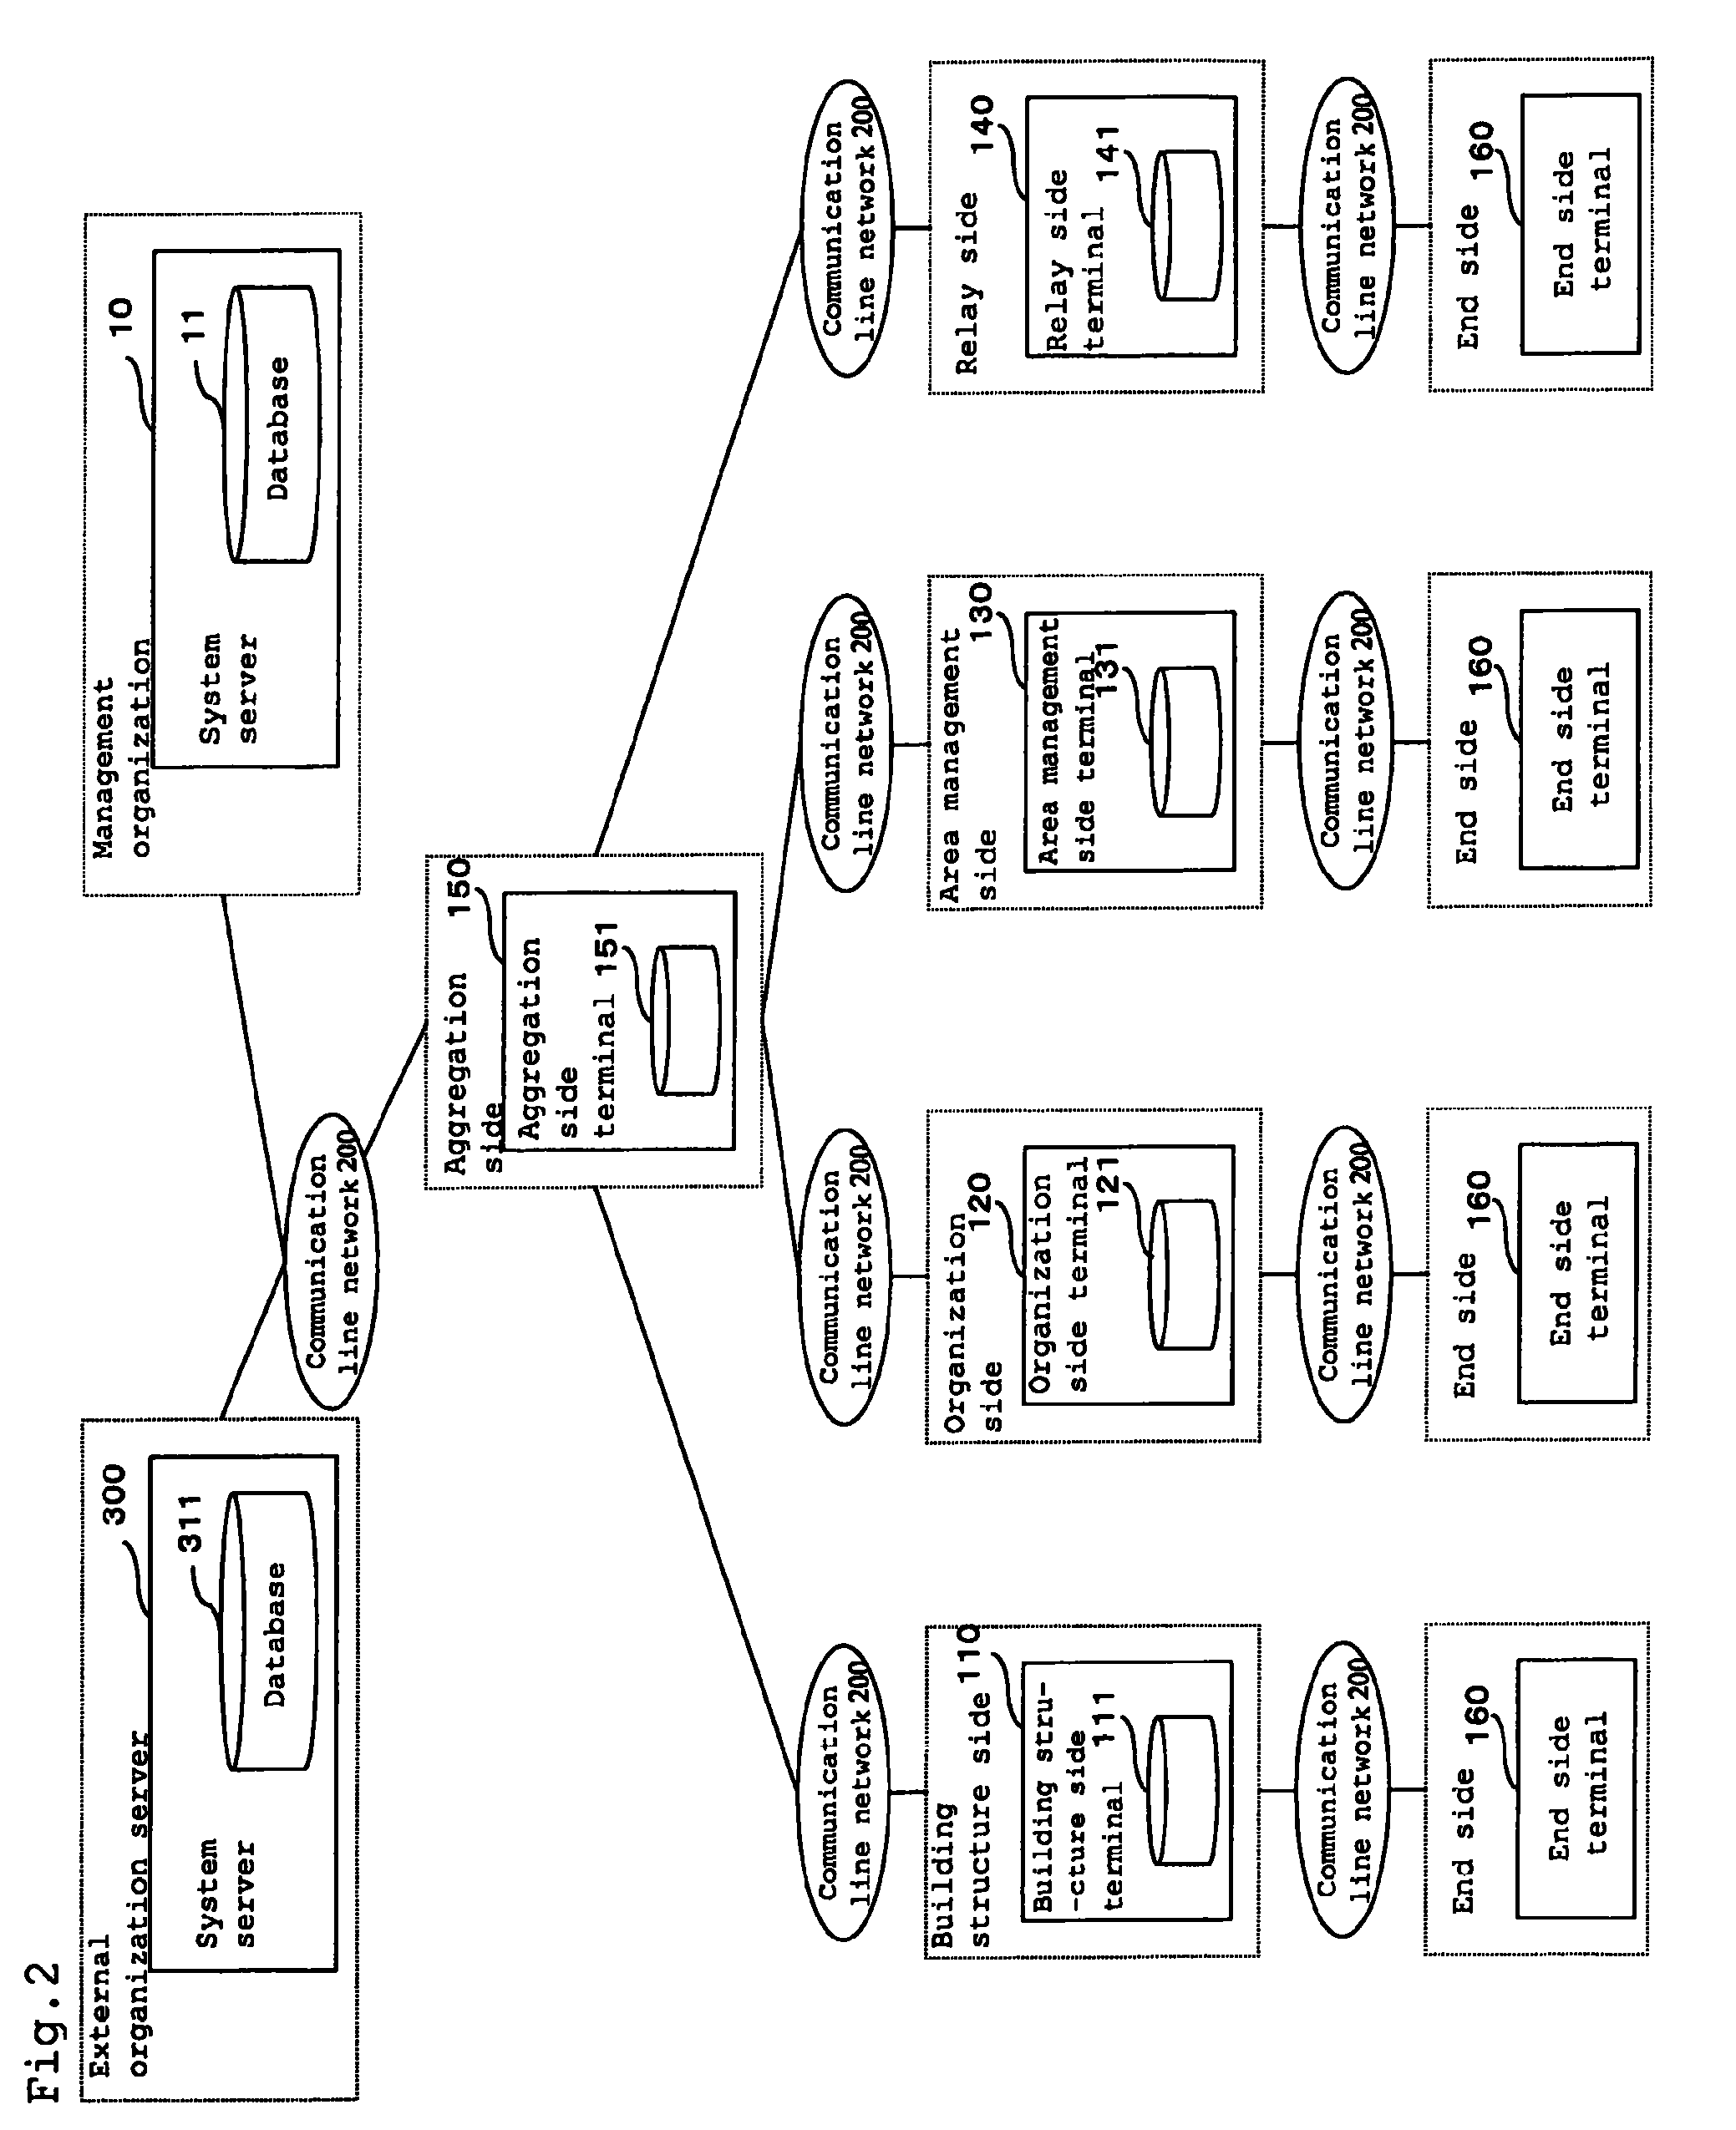 Authentication system